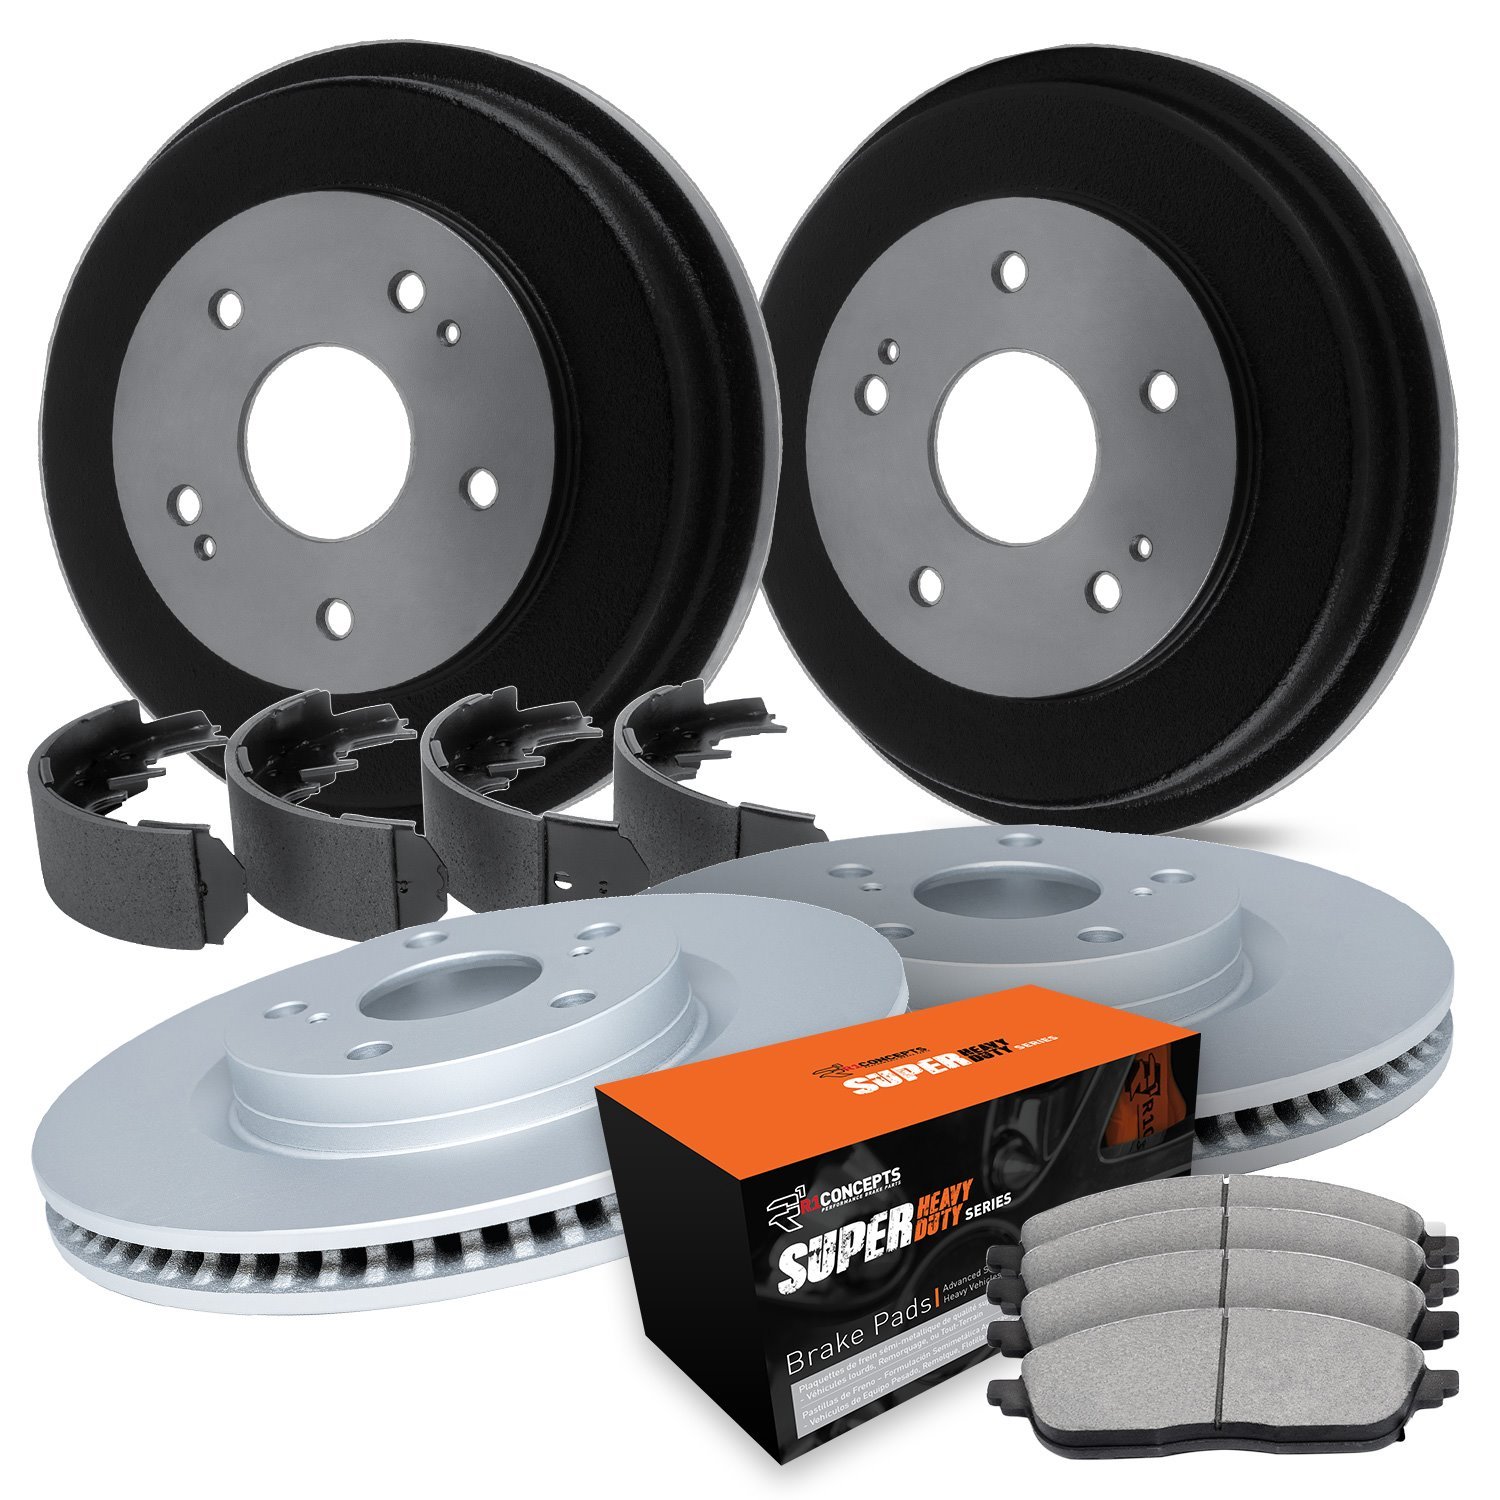 GEO-Carbon Brake Rotor & Drum Set w/Super-Duty Pads & Shoes, 2003-2004 Ford/Lincoln/Mercury/Mazda, Position: Front & Rear